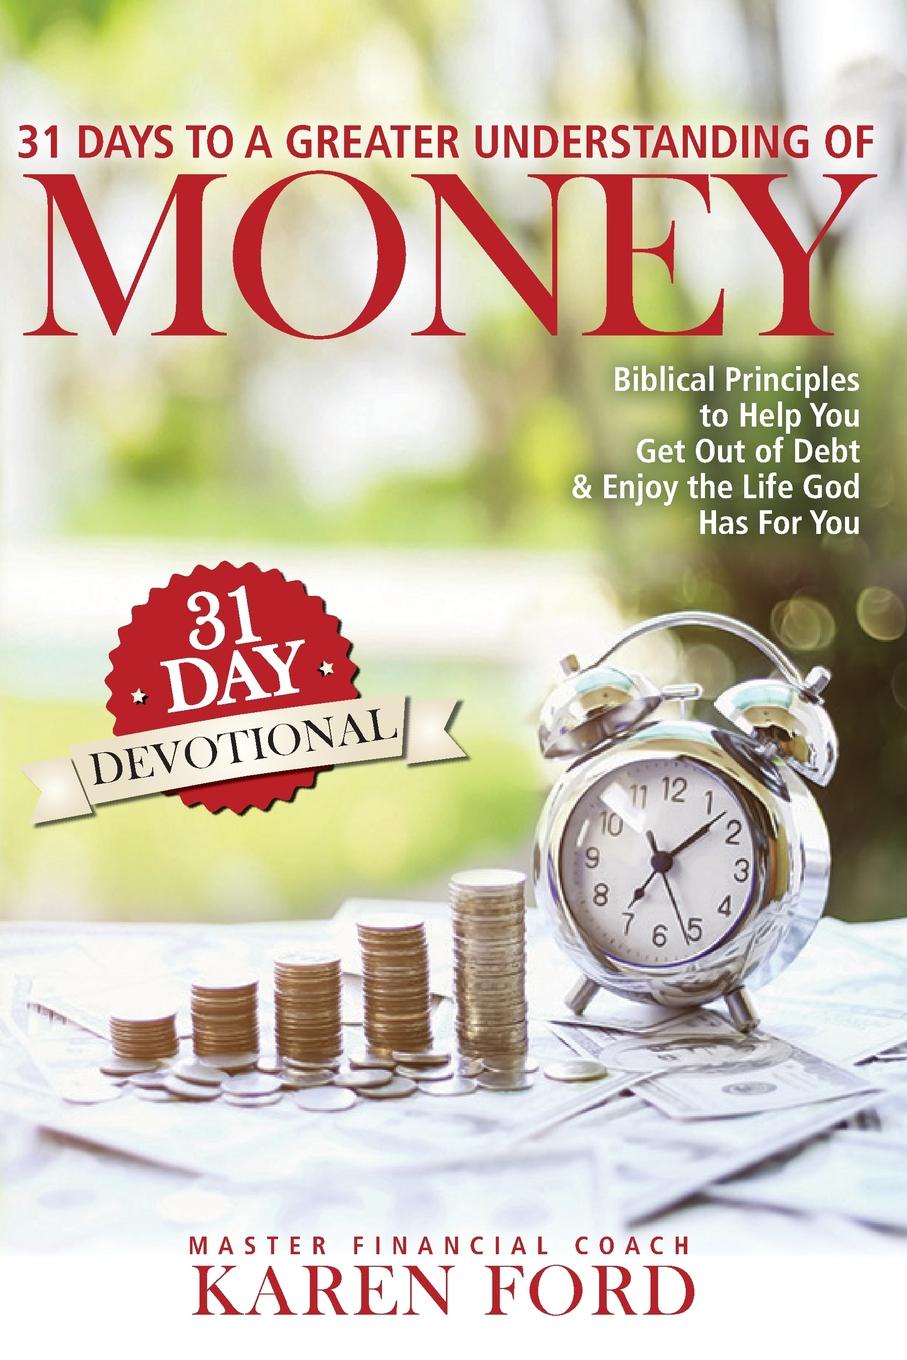 31 Days to a Greater Understanding of MONEY. Biblical Principles to Help You Get Out of Debt . Enjoy the Life God Has For You